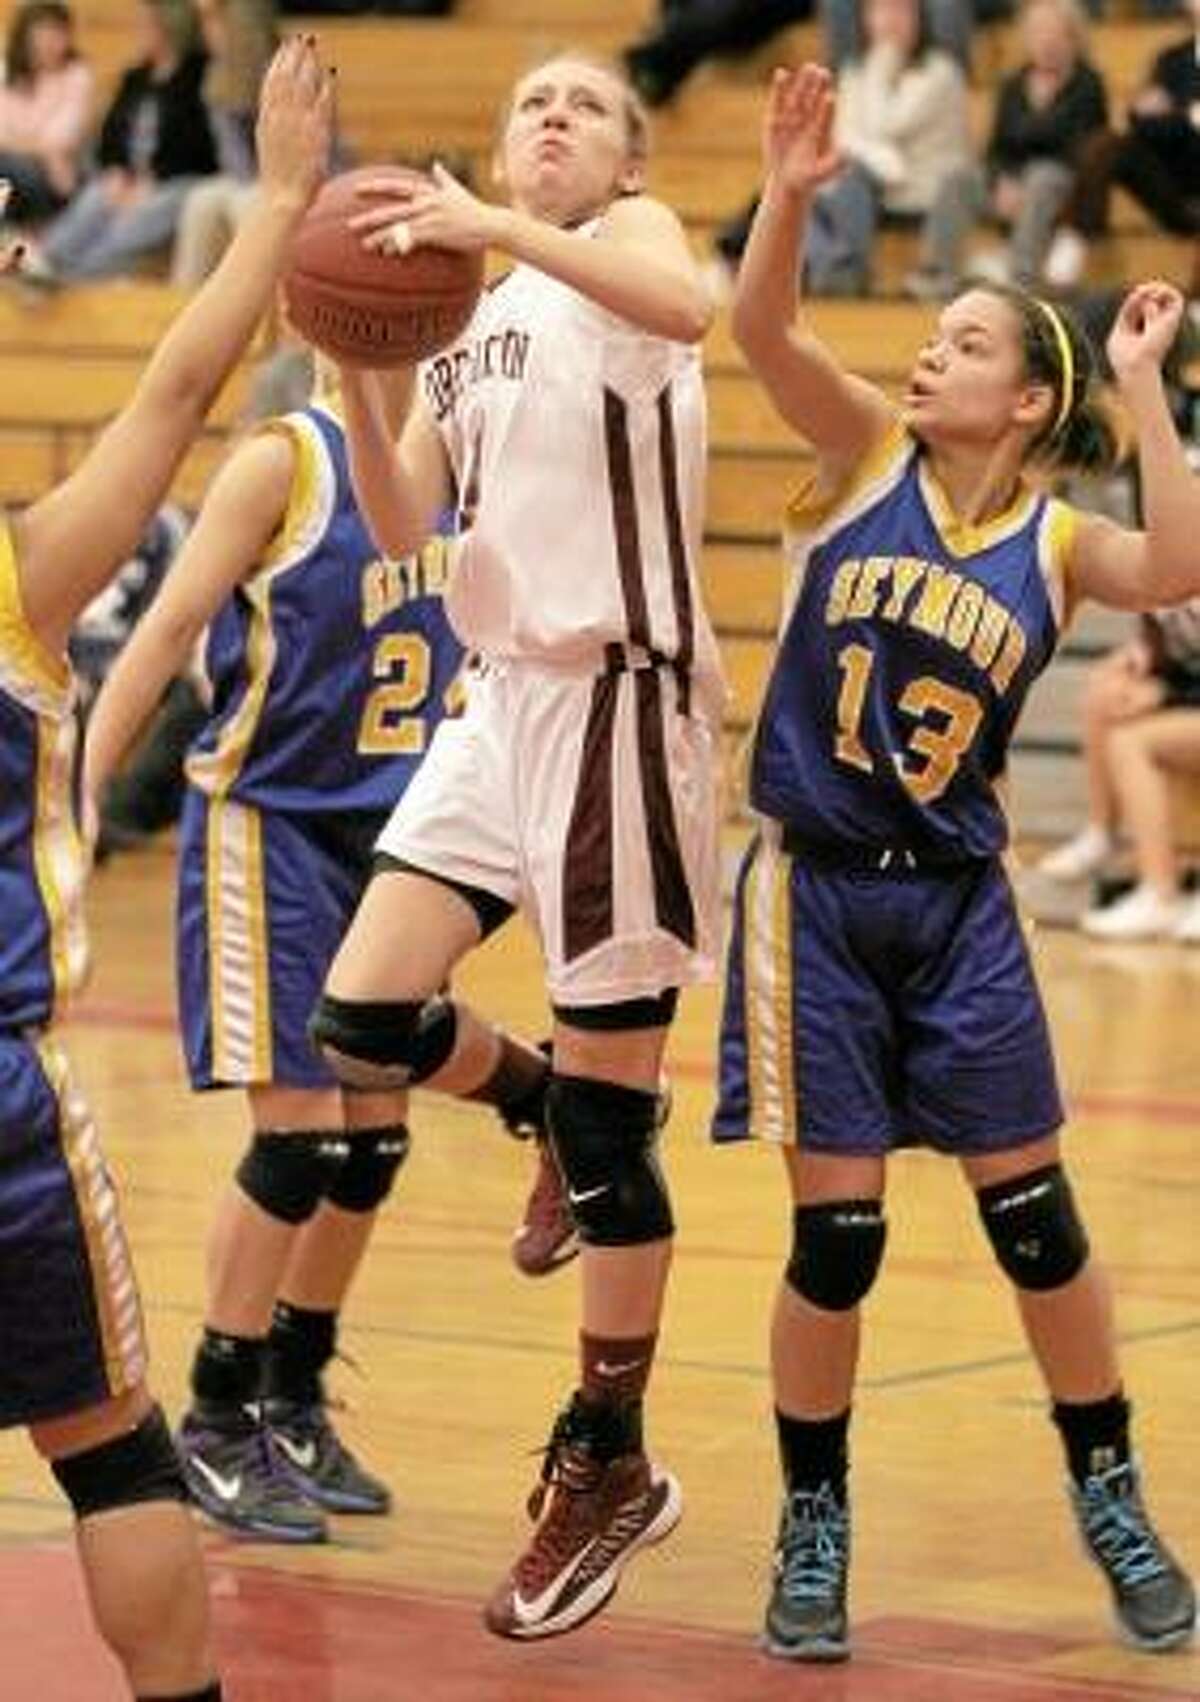 Nicole Kozlak of the Lady Raiders goes to the hoop as Seymour's Aleesha Johnson (13) tries to block. Photo by Marianne Killakey/Special to Register Citizen